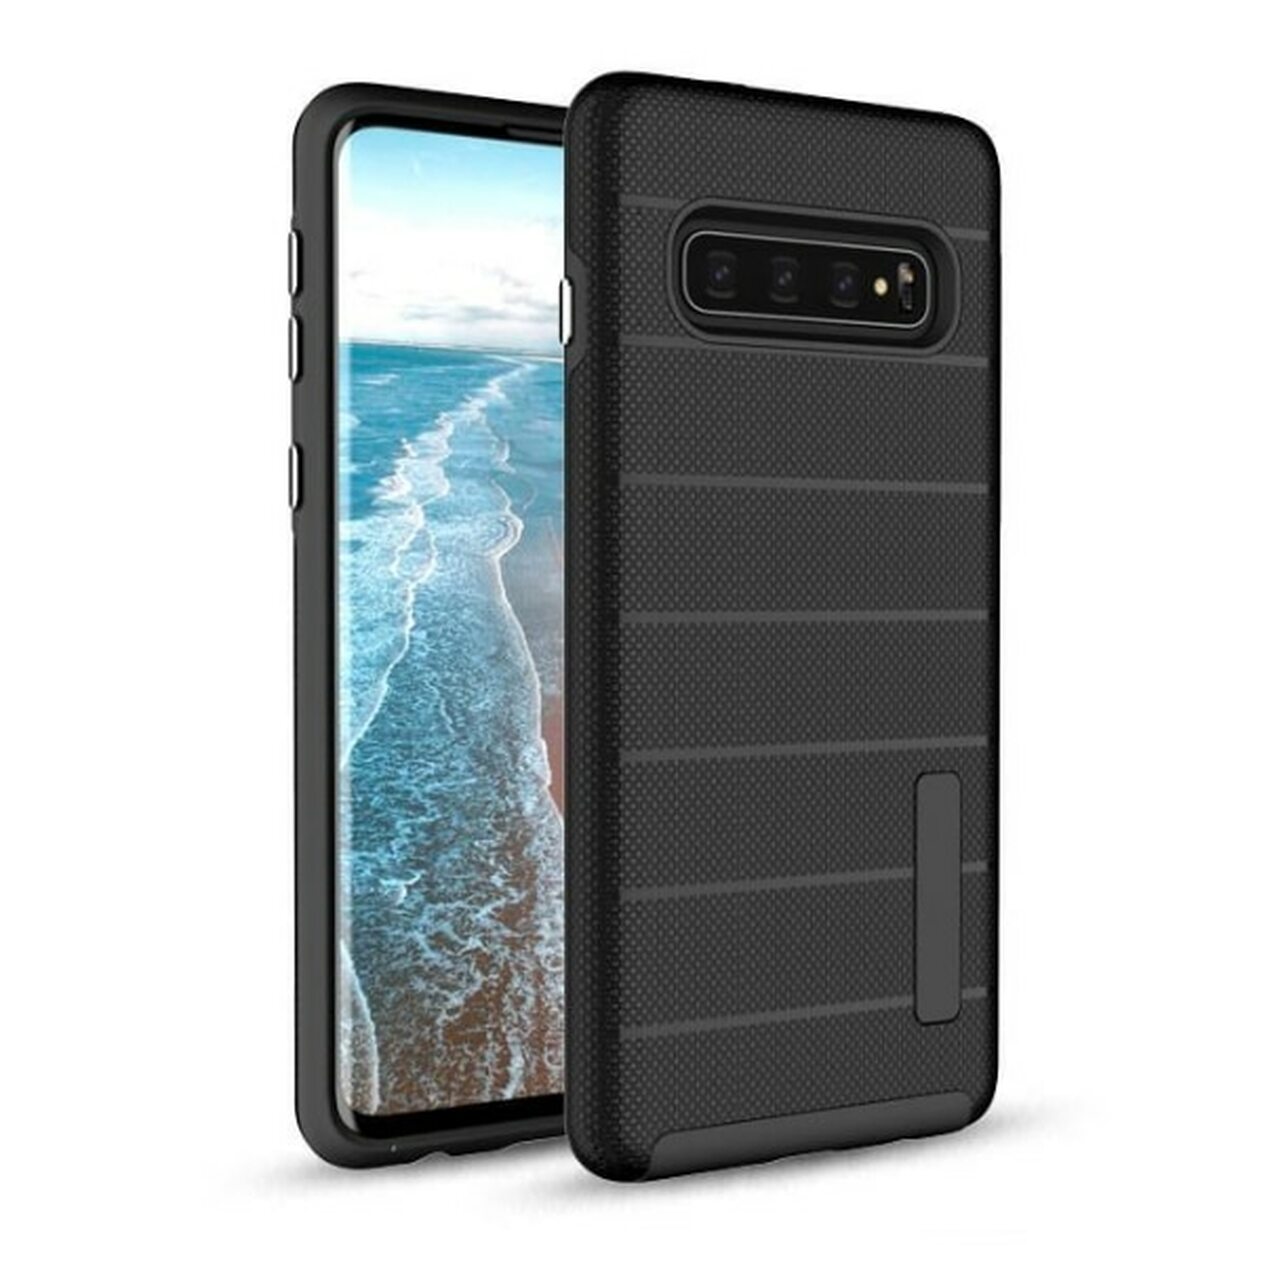 Caseology Hard Shell Fashion Case for Samsung Series  S  - S8 / S8+ / S9 / S9+ / S10 / S10+